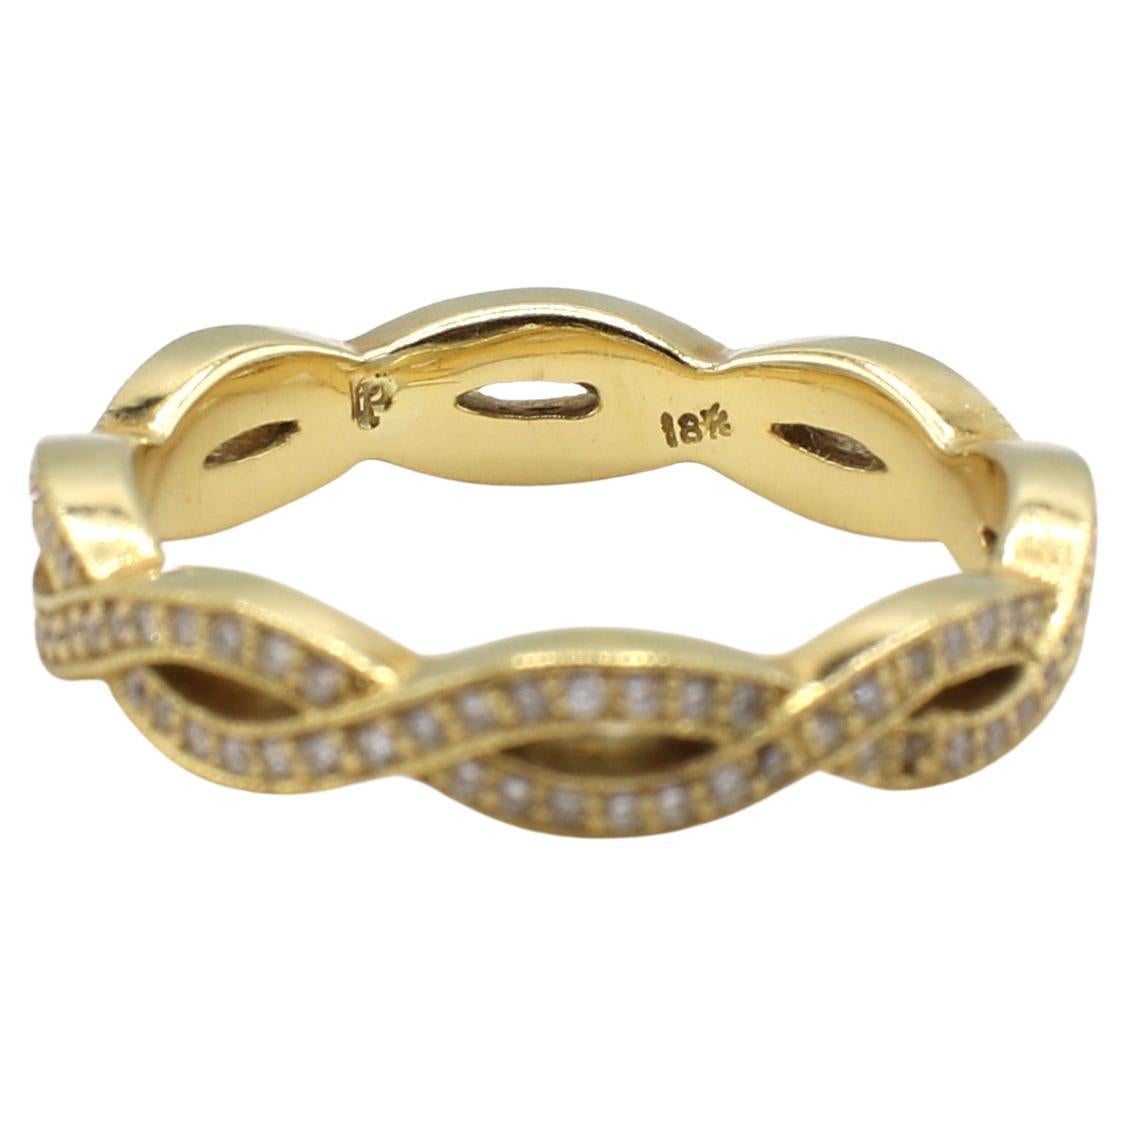 Penny Preville 18 Karat Yellow Gold Twist Natural Diamond Eternity Band Ring 
Metal: 18 Karat Yellow Gold
Weight: 4.26 grams
Diamonds: Approx. .50 CTW G-H VS round natural diamonds
Size: 6.25 (US)
Width: 4mm
Height: 2mm